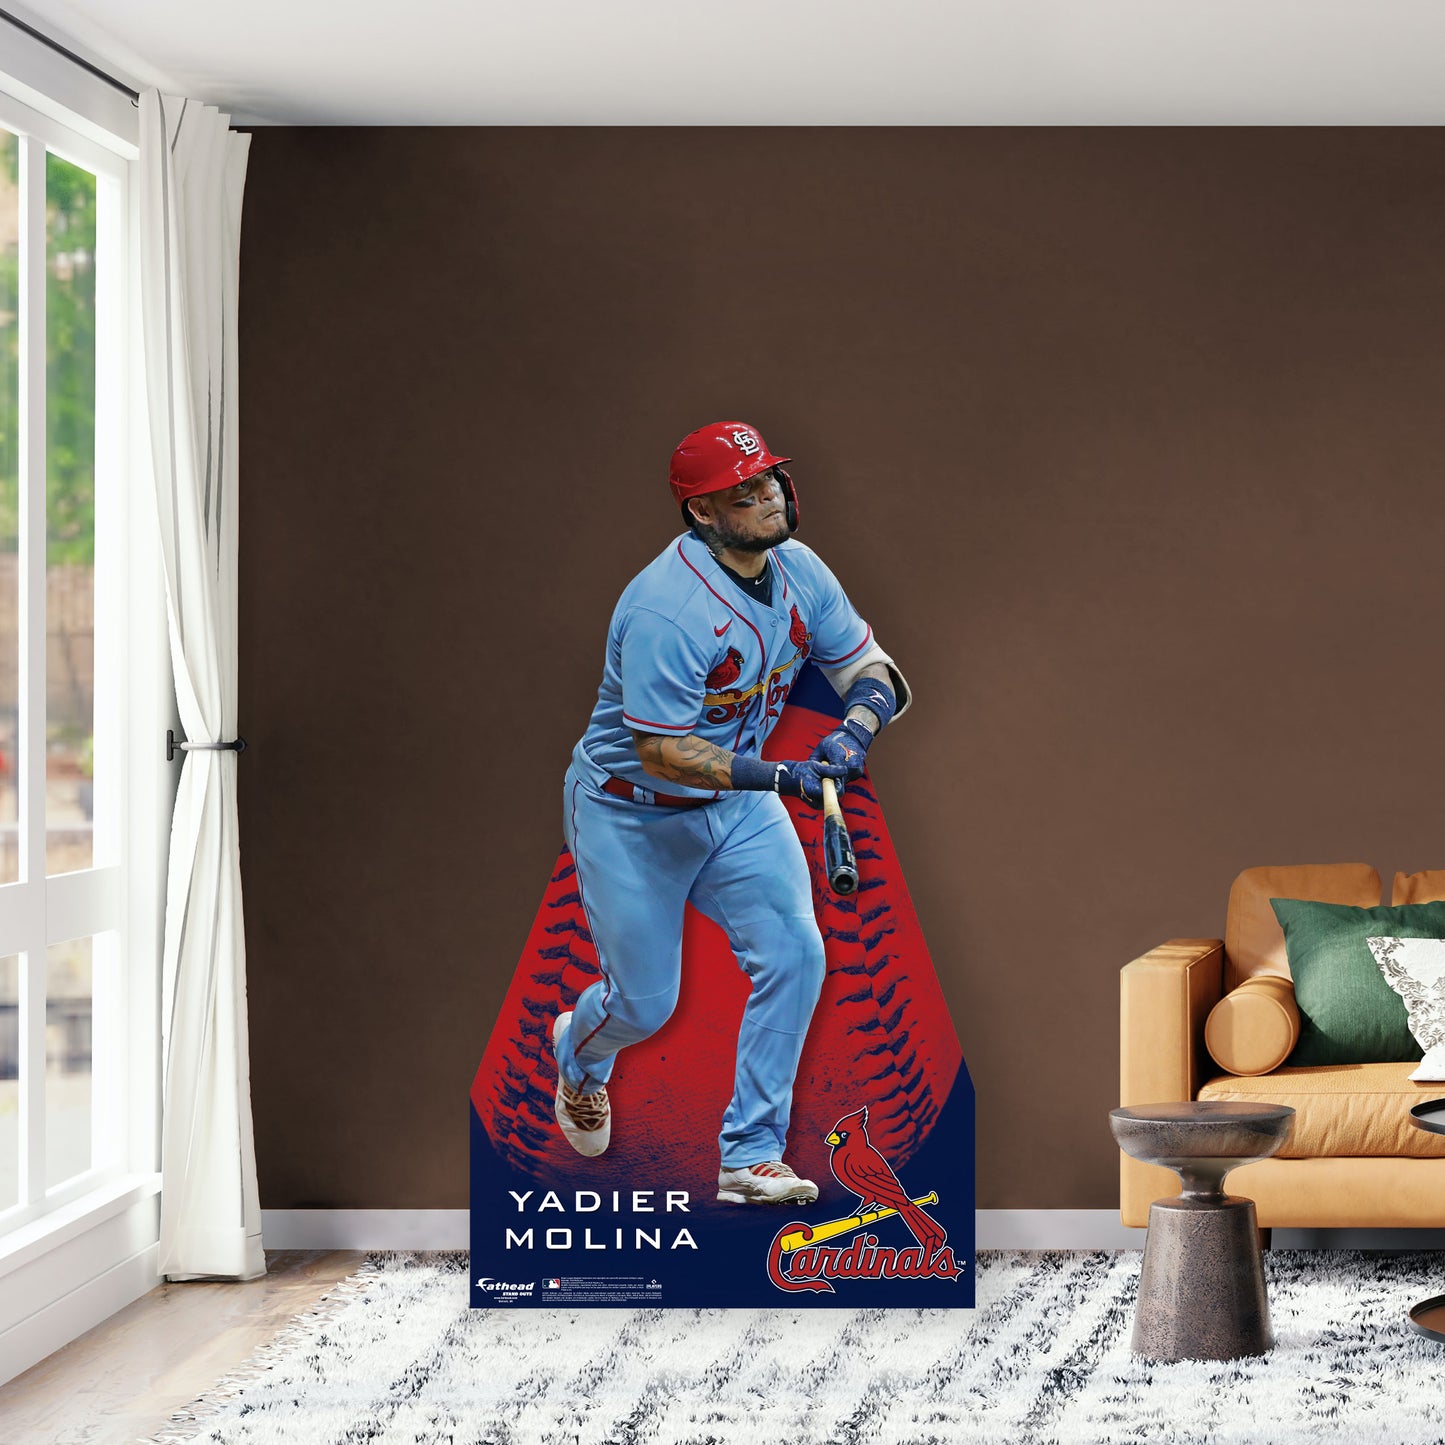 Fathead Yadier Molina St. Louis Cardinals Giant Removable Wall Mural